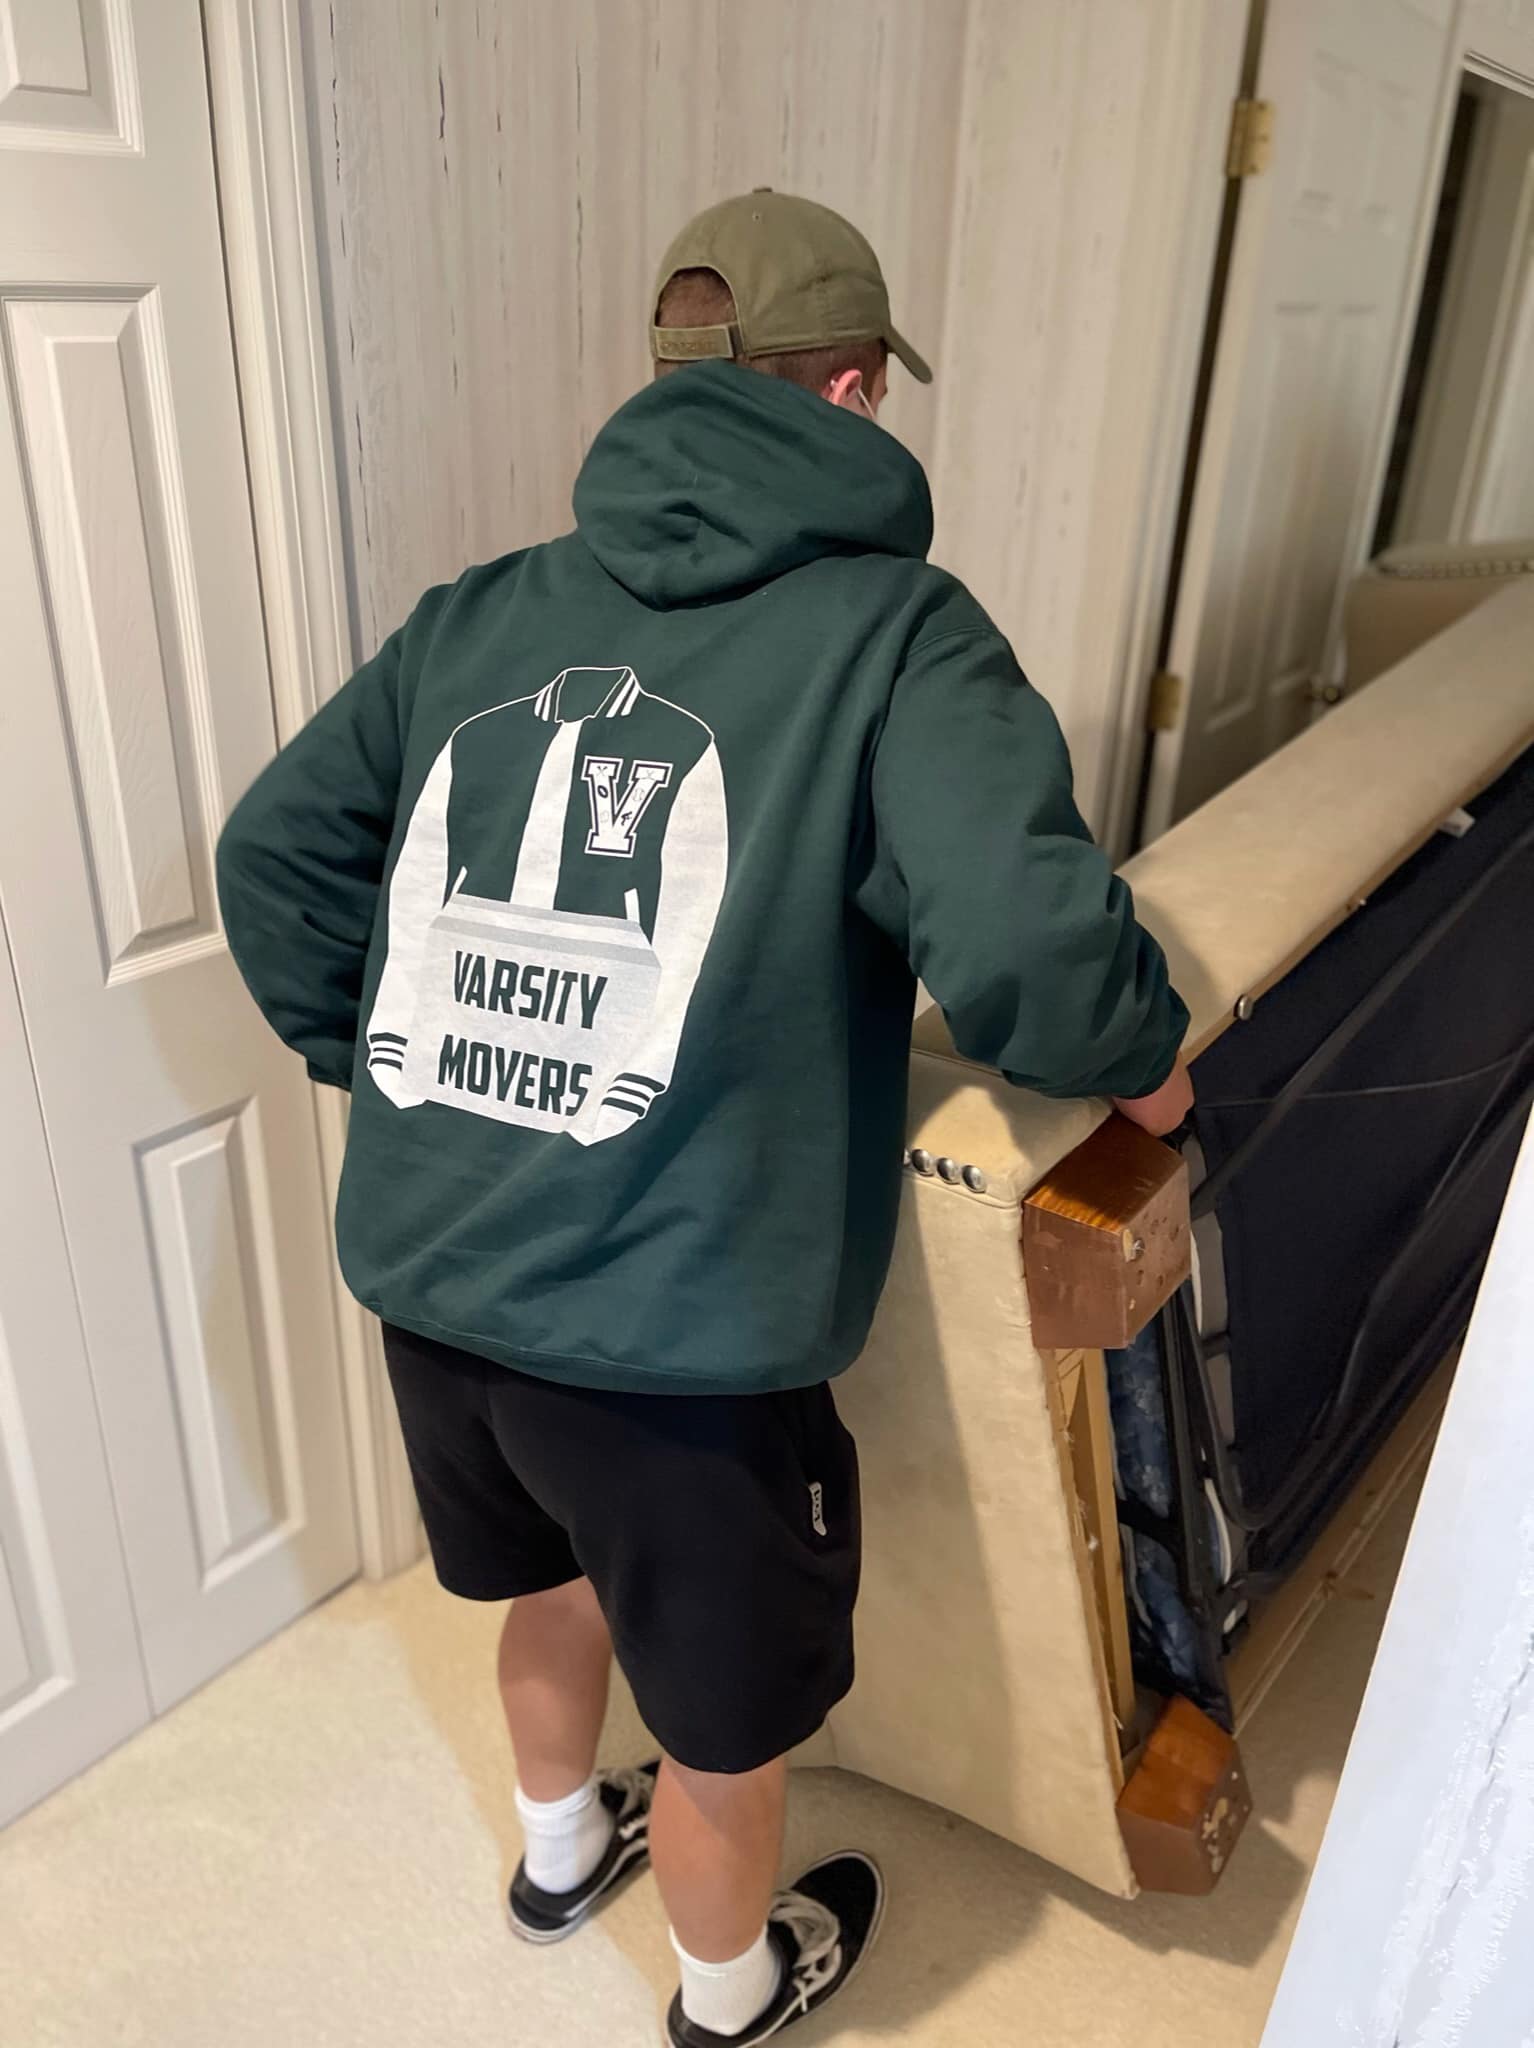 An image of A worker from Varsity Movers carrying a couch.